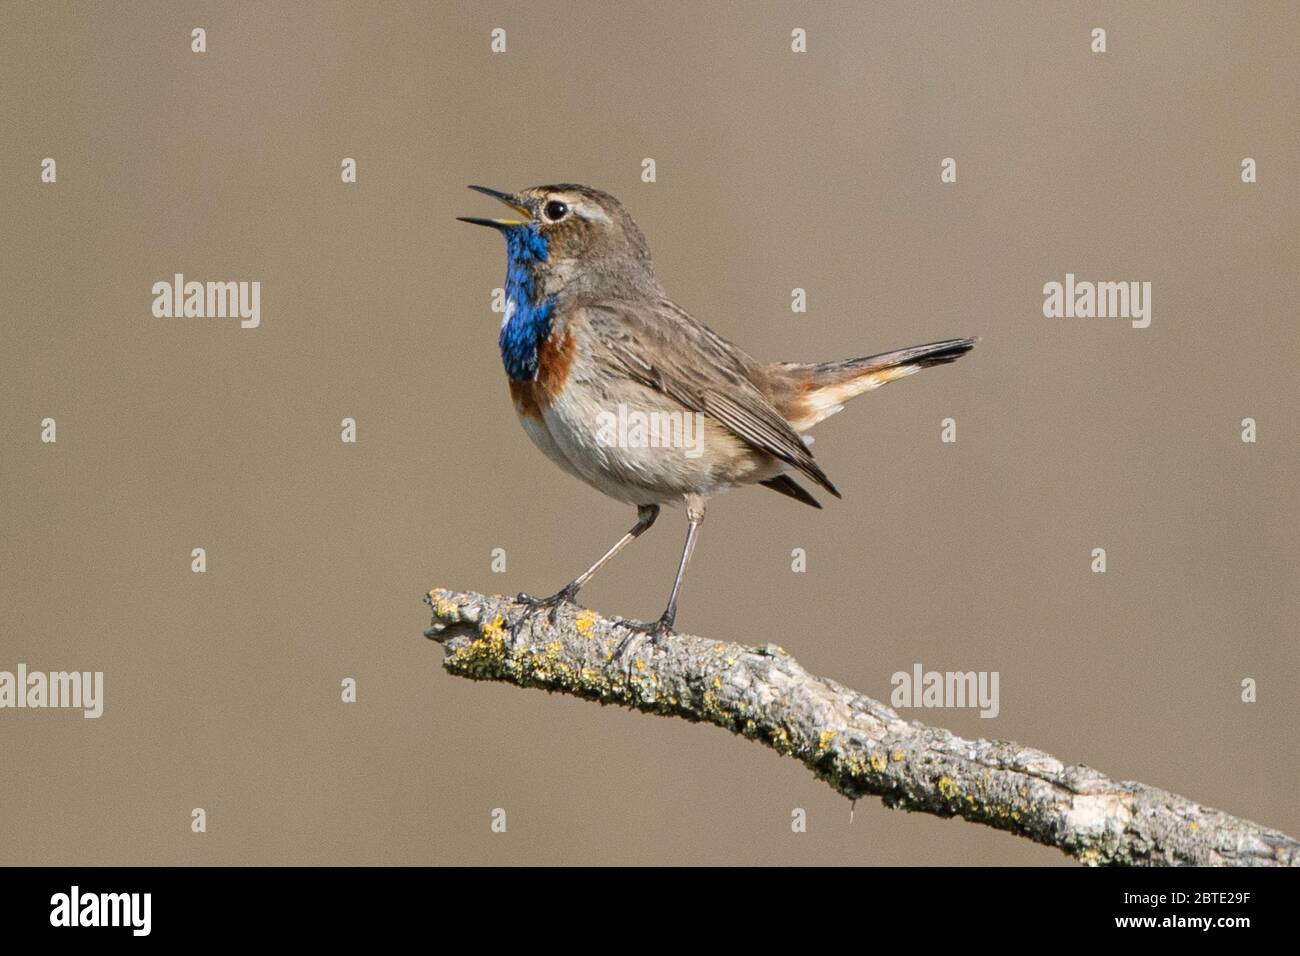 White-spotted Bluethroat (Luscinia svecica cyanecula), singing male on a branch, side view, Germany, Bavaria, Erdinger Moos Stock Photo